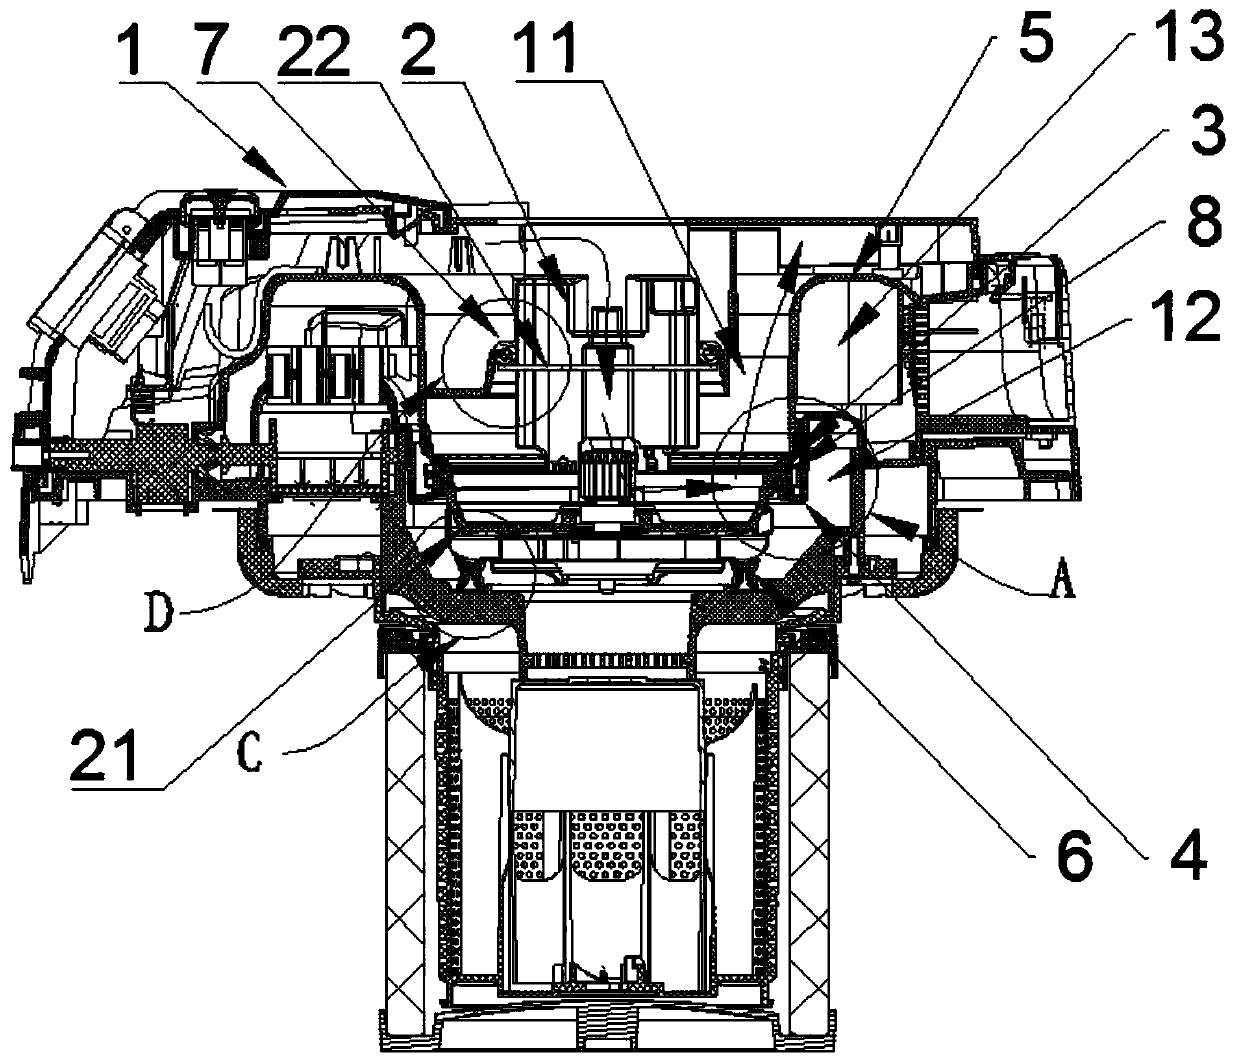 Enclosed installation mechanism for motors in small and medium electrical appliances